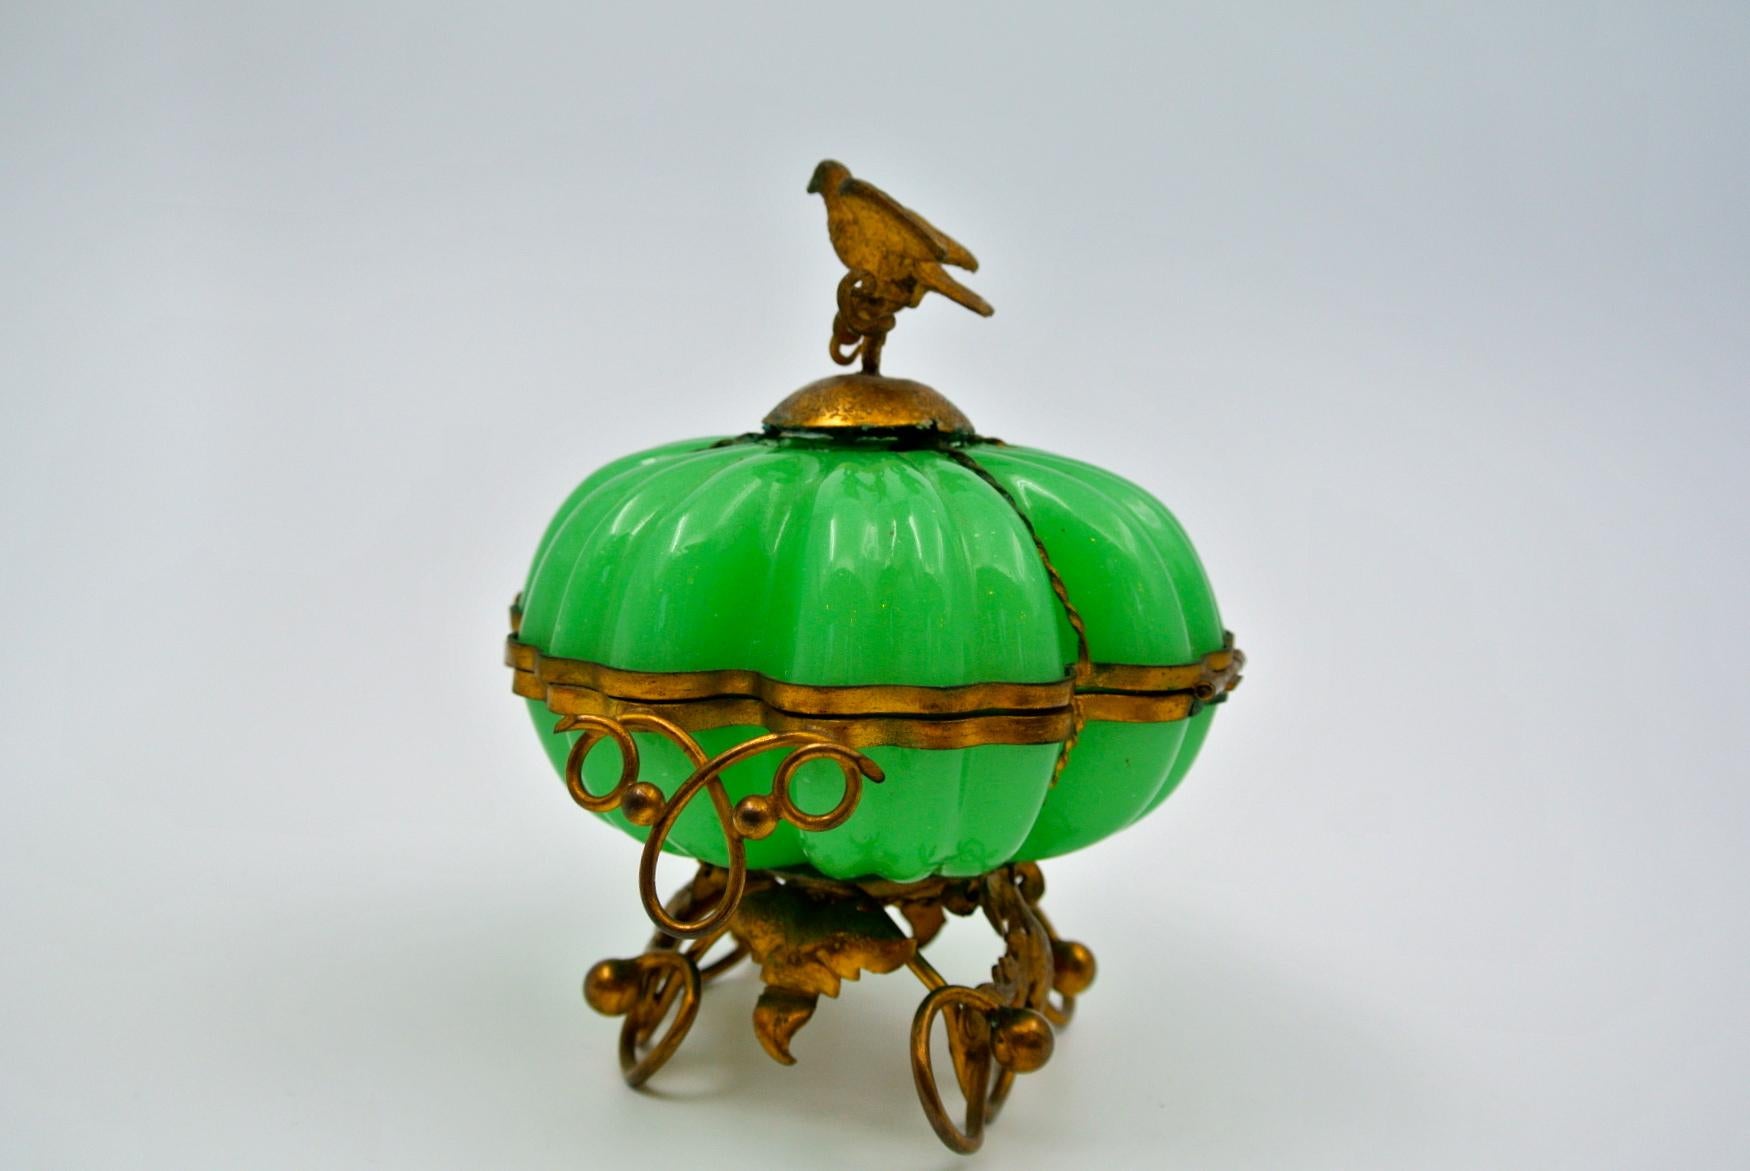 Pumpkin-shaped box mounted with a bird in opaline and golden bronze, 19th century, Napoleon III period
Measures: H 15cm, W 15cm, D 13cm.